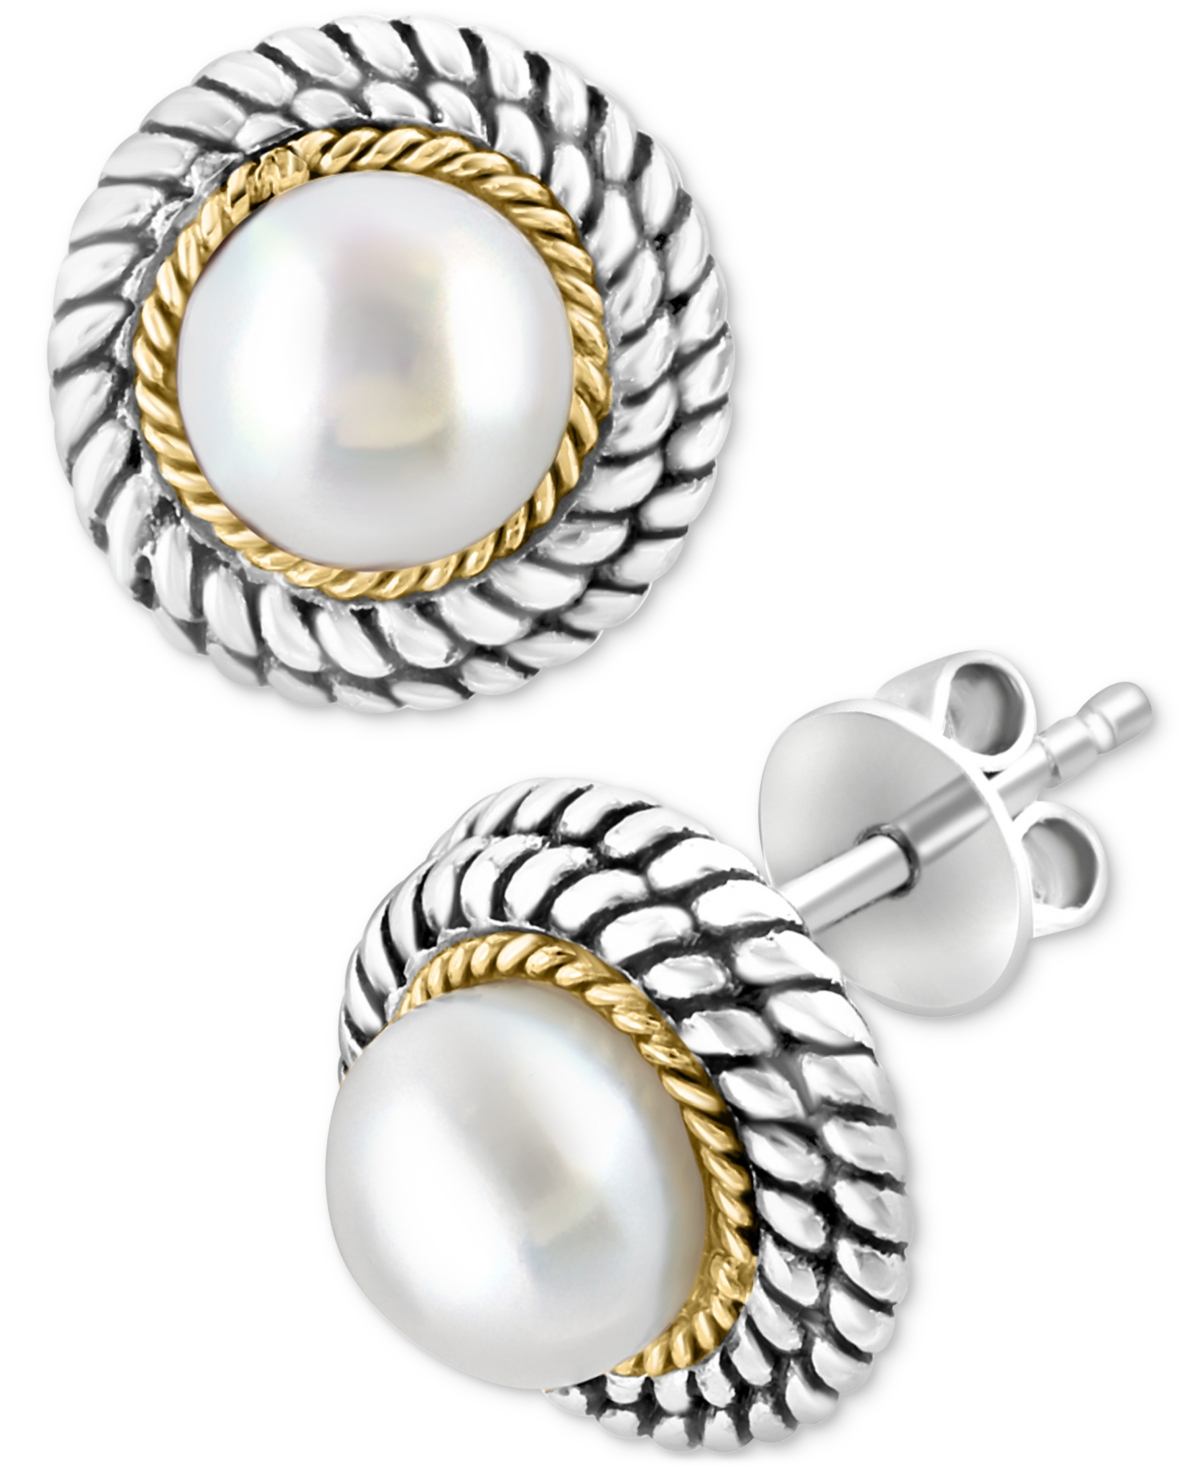 Effy Collection Effy Freshwater Pearl (7mm) Stud Earrings In Sterling Silver & 18k Gold-plate In K Gold Over Sterling Silver